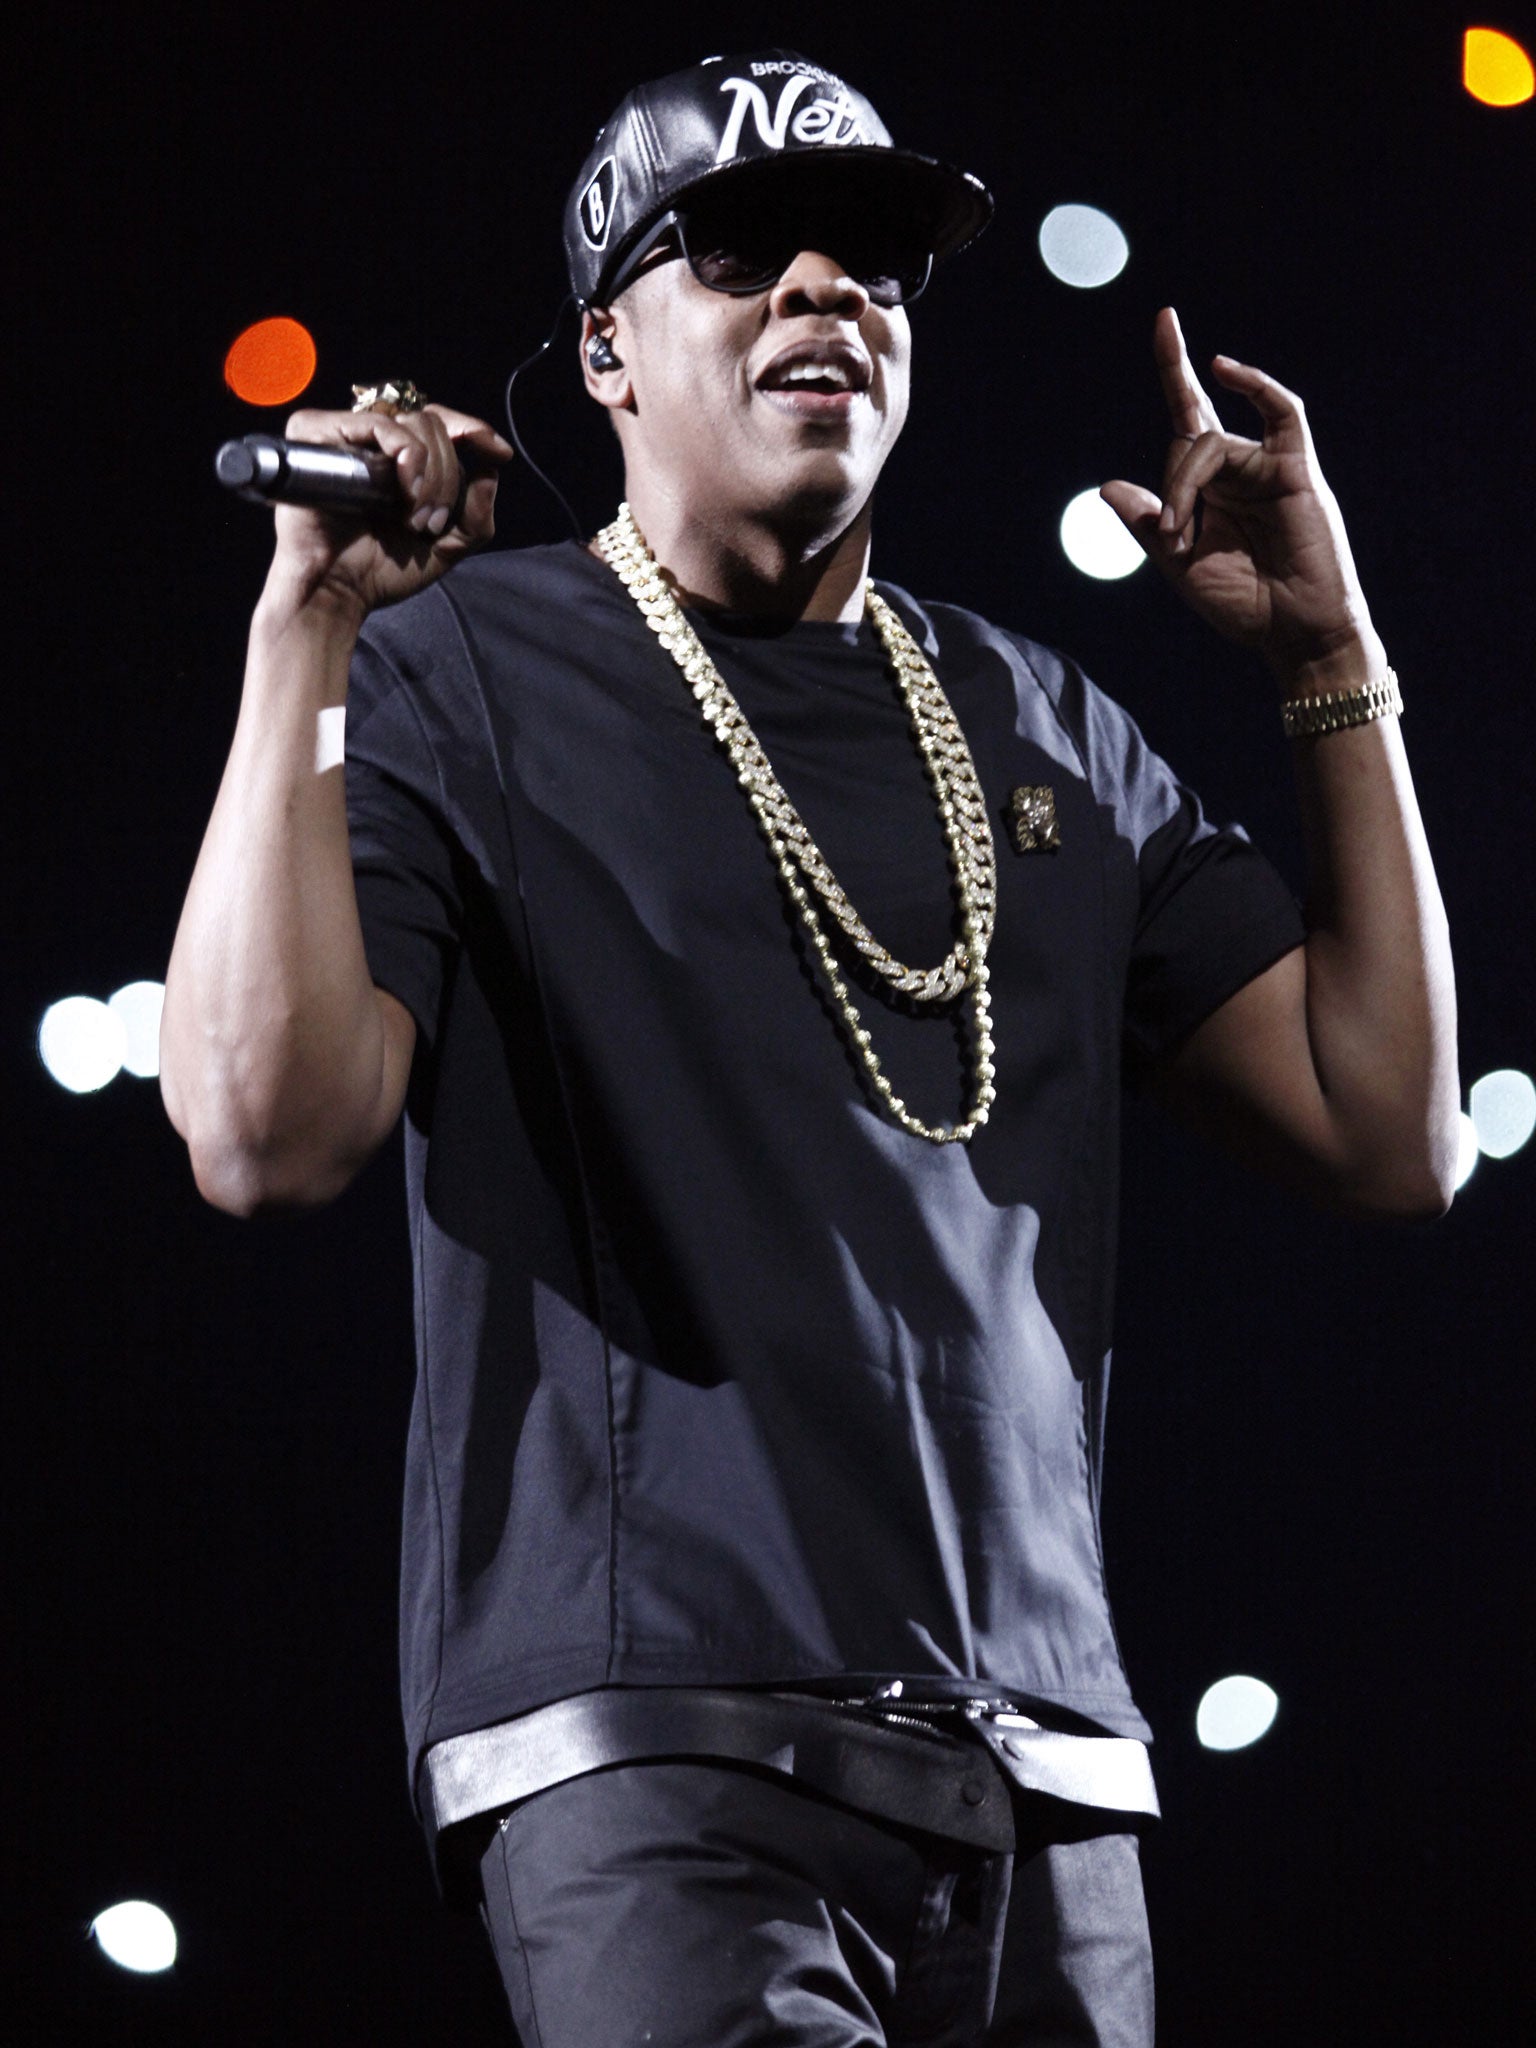 US rapper Jay-Z performing during a concert